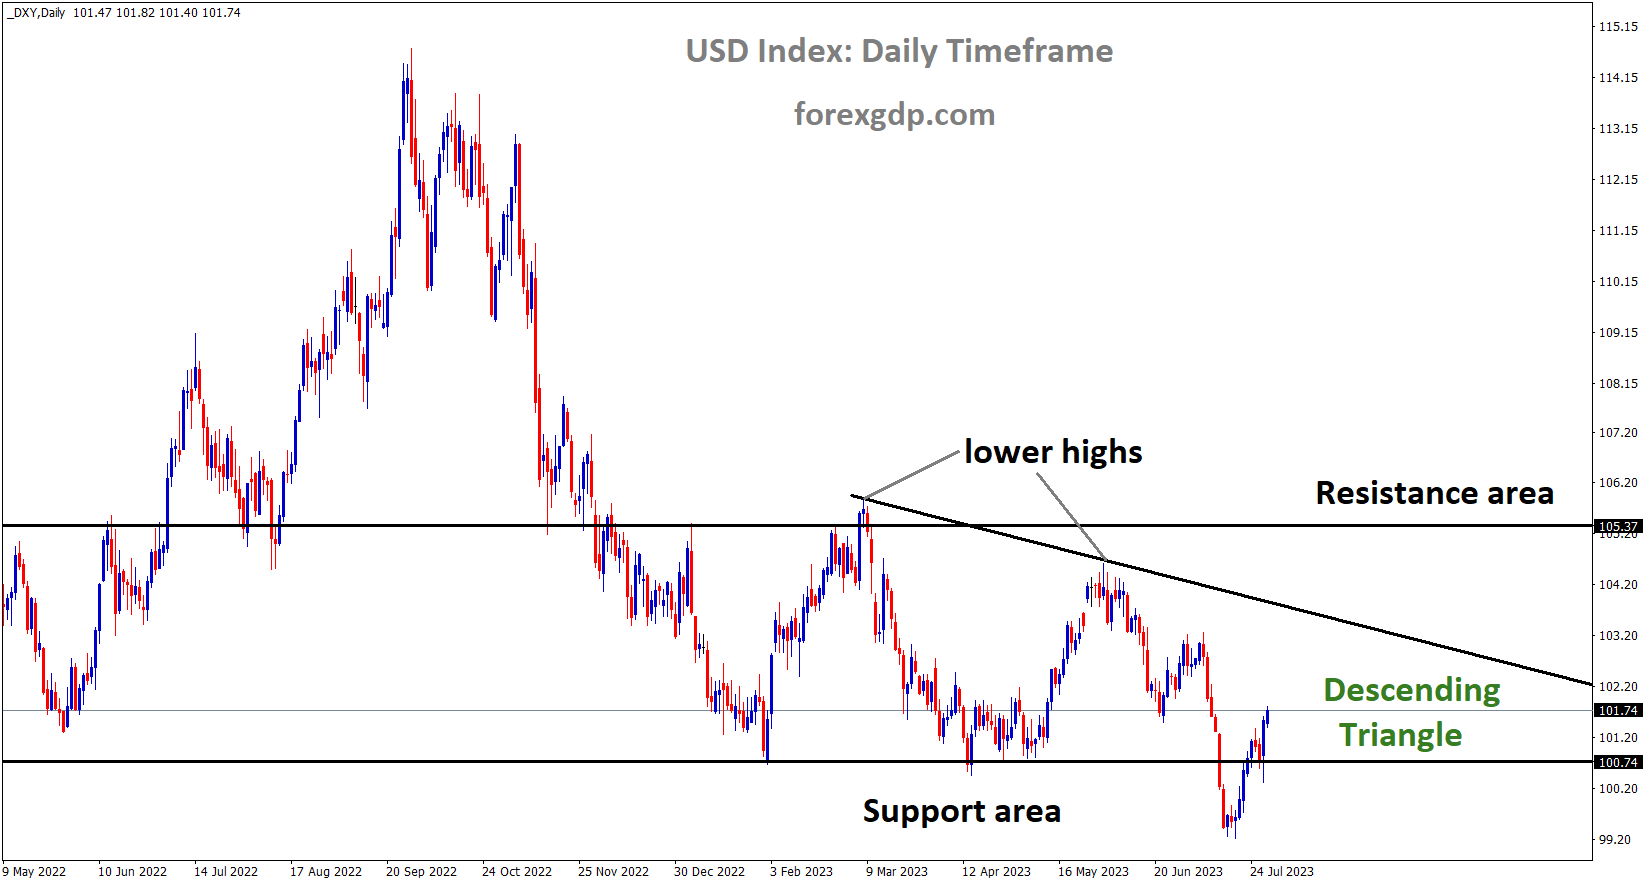 DXY US Dollar index is moving in the Descending triangle pattern and the market has rebounded from the horizontal support area of the pattern